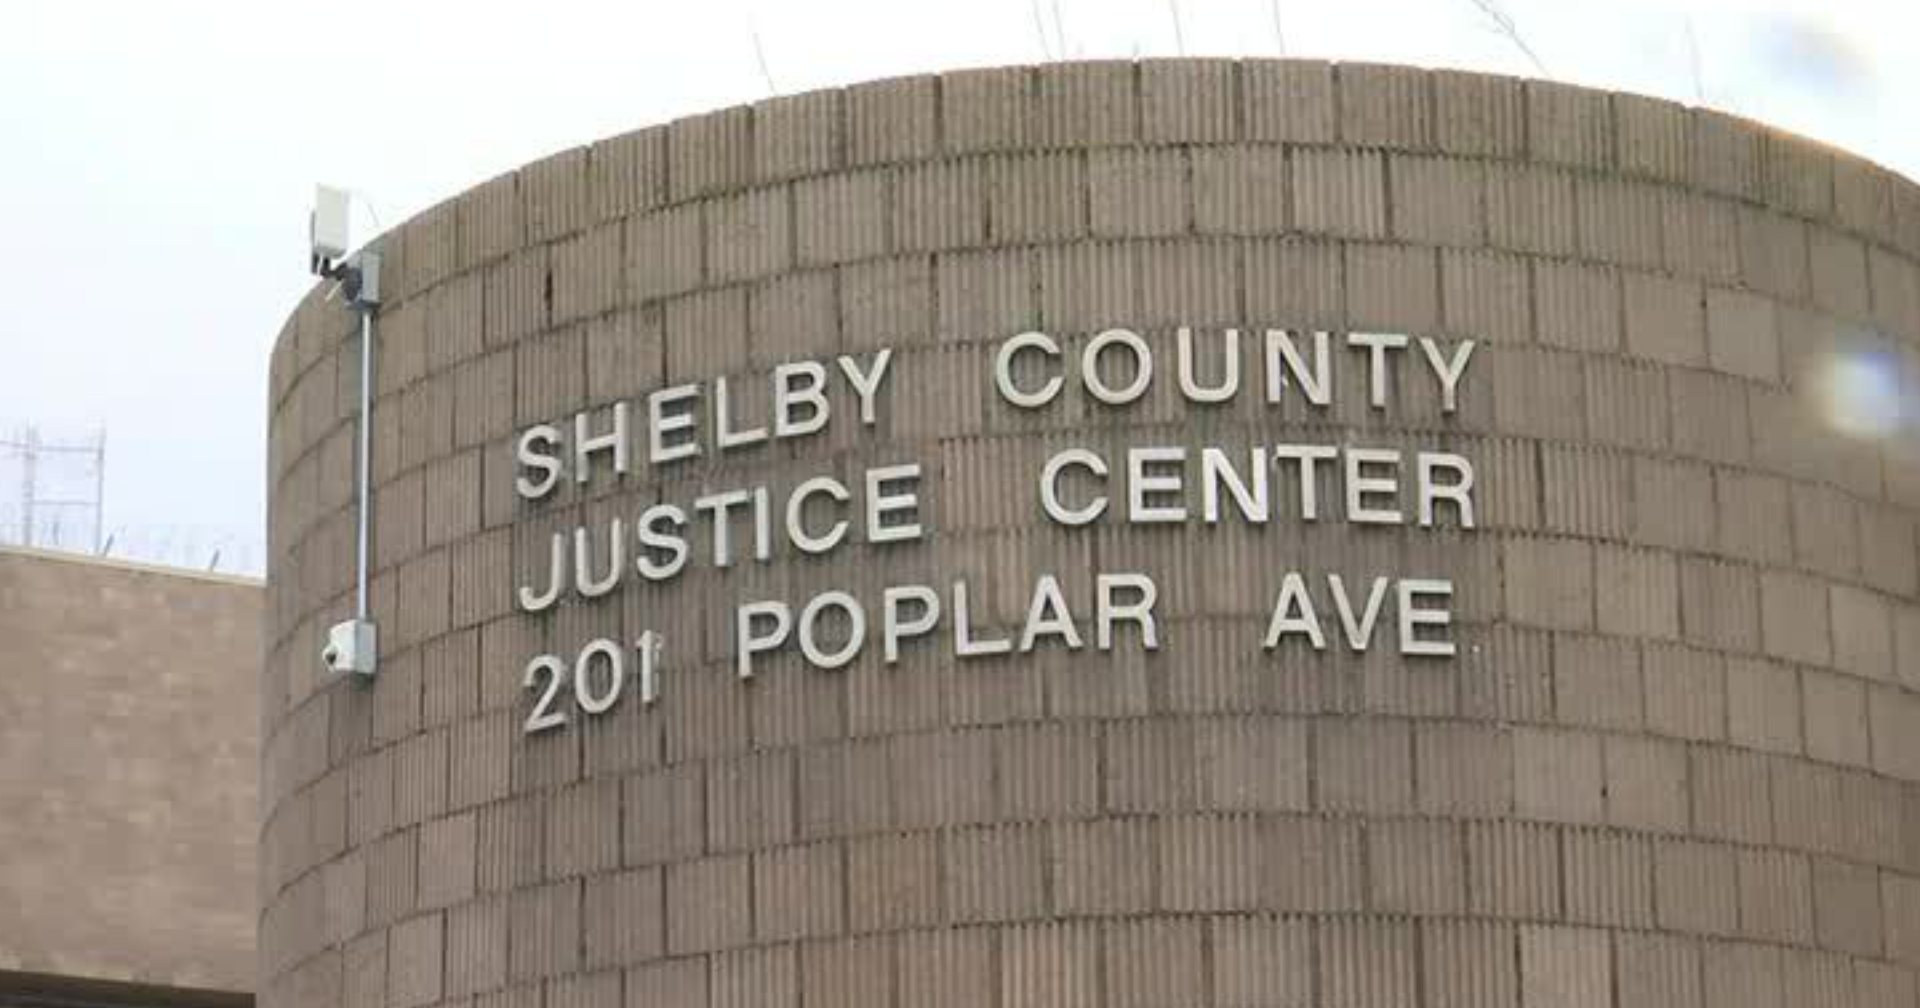 County Commission and Shelby County District Attorney met for a “fair bail” plan